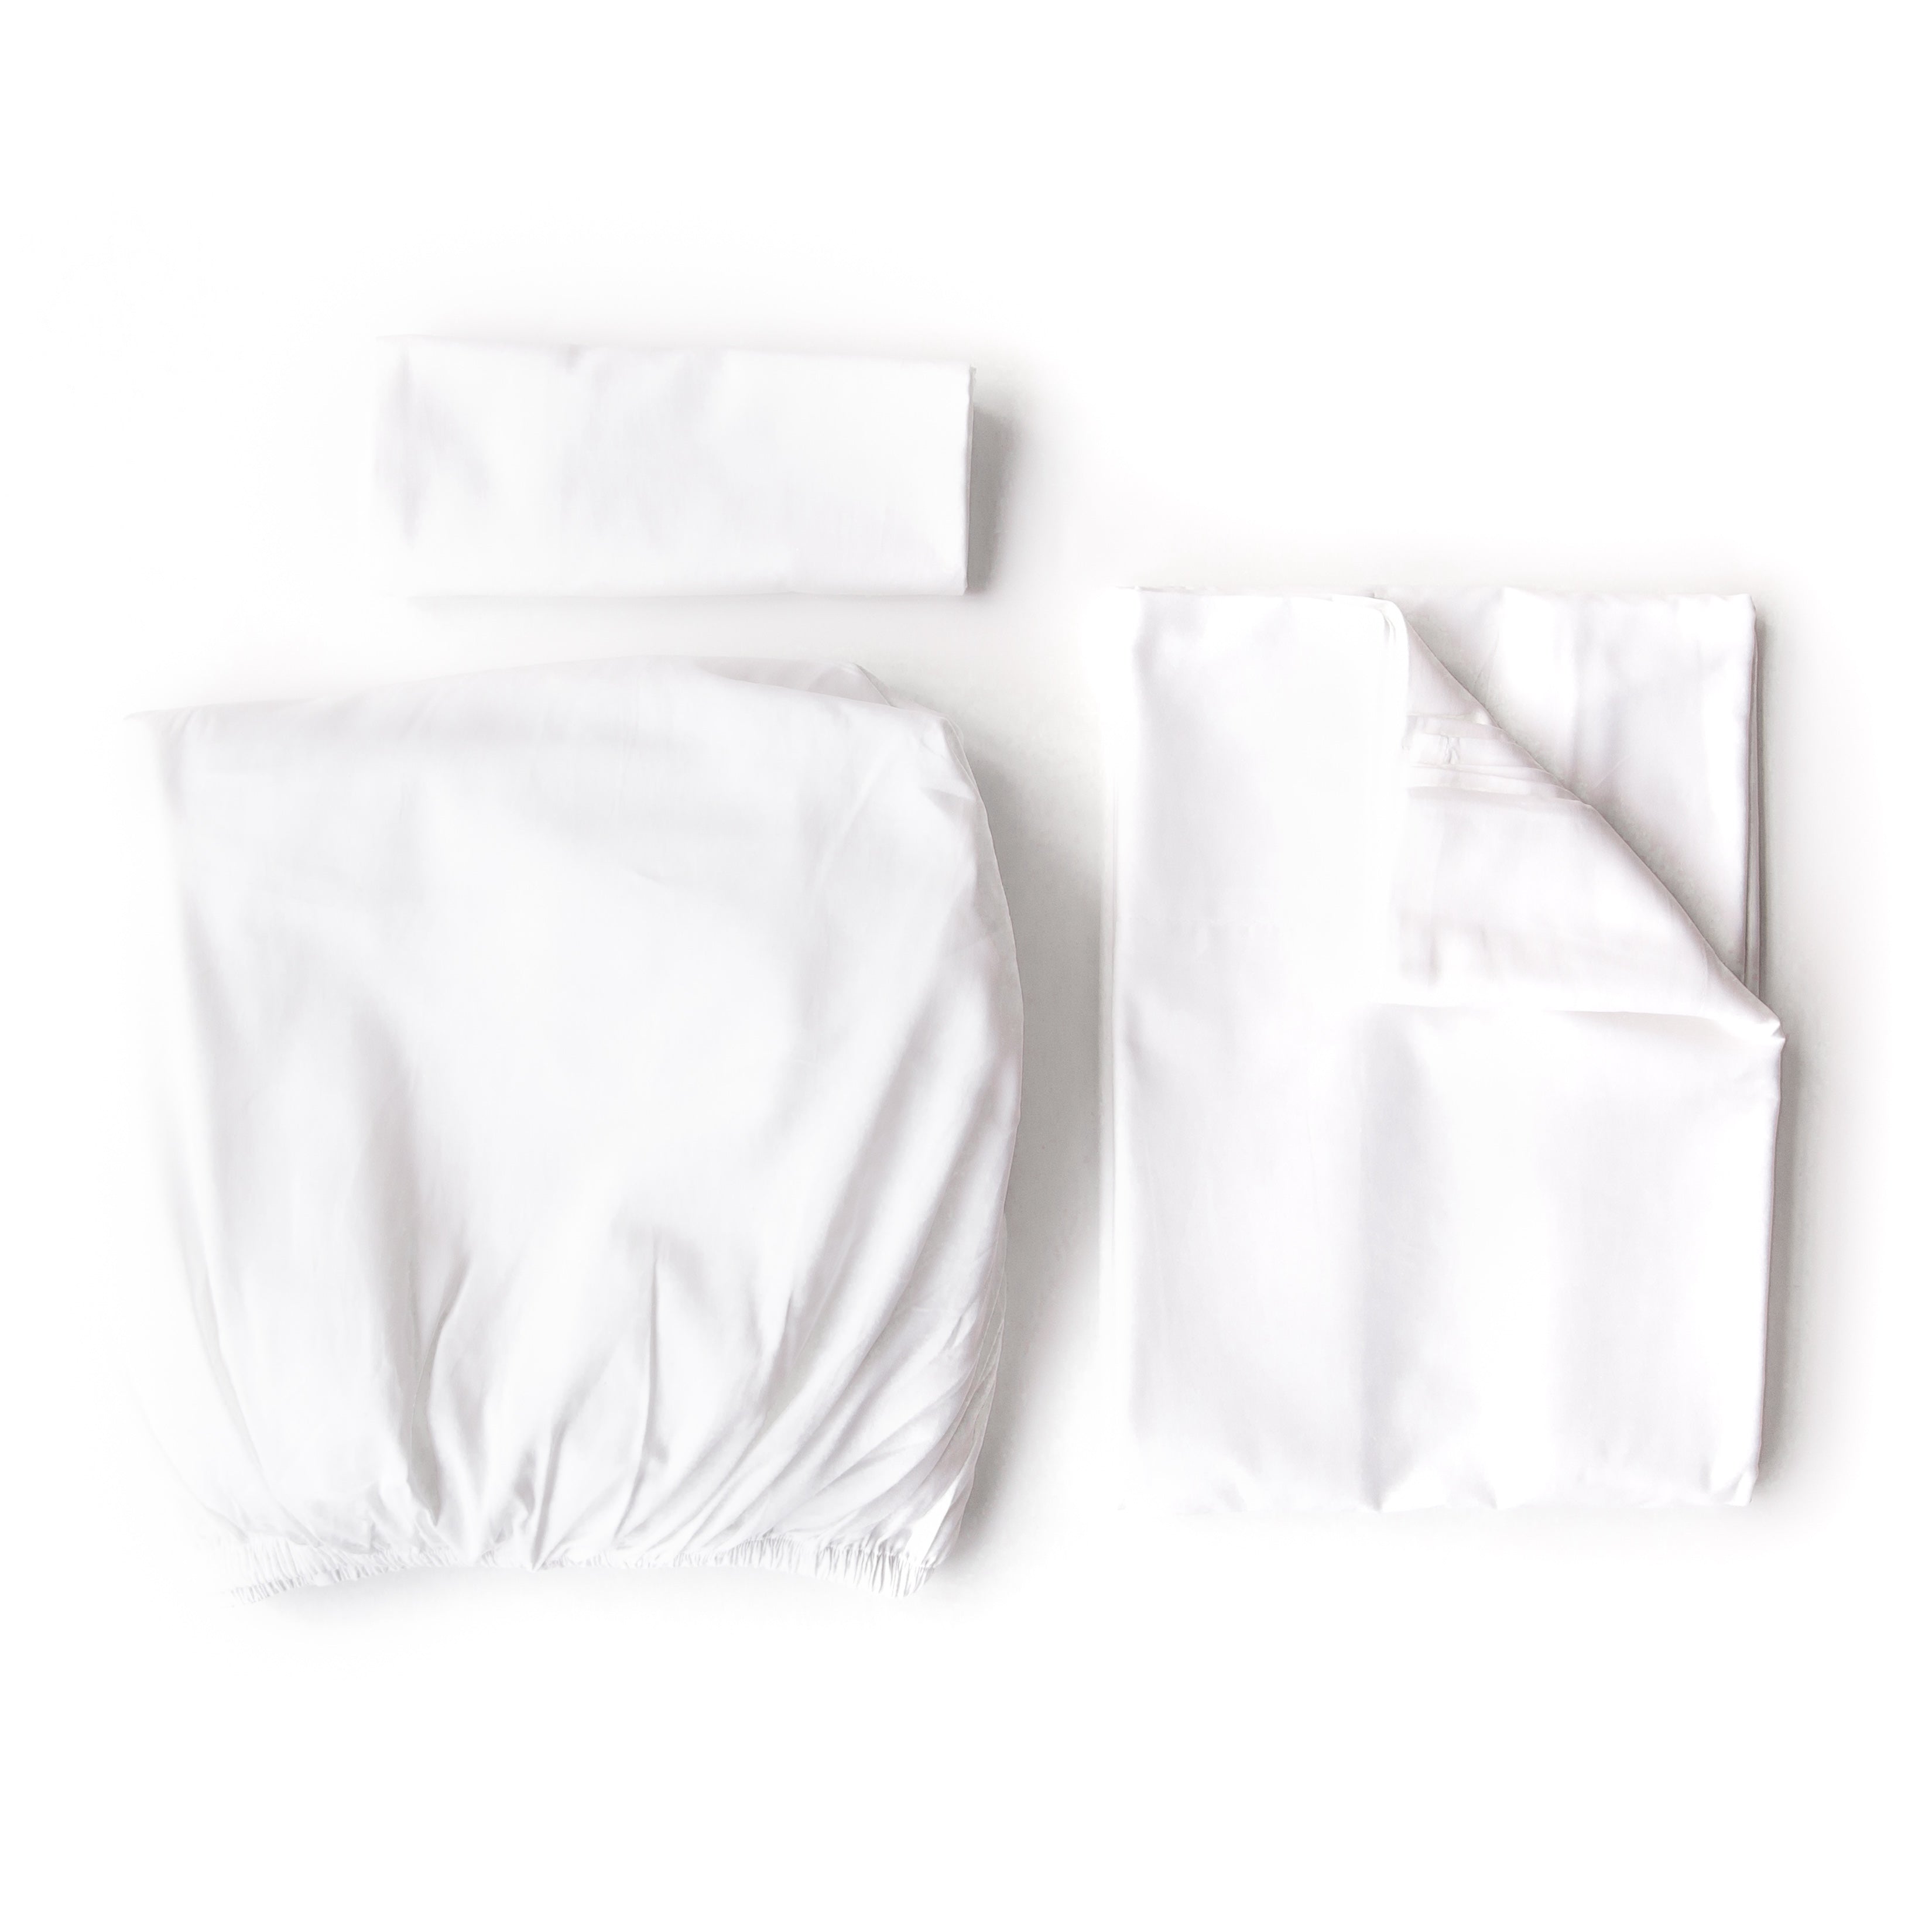 Oolie organic cotton pillowcases, flat sheet, and fitted sheet in white cotton, folded flat on a white background.